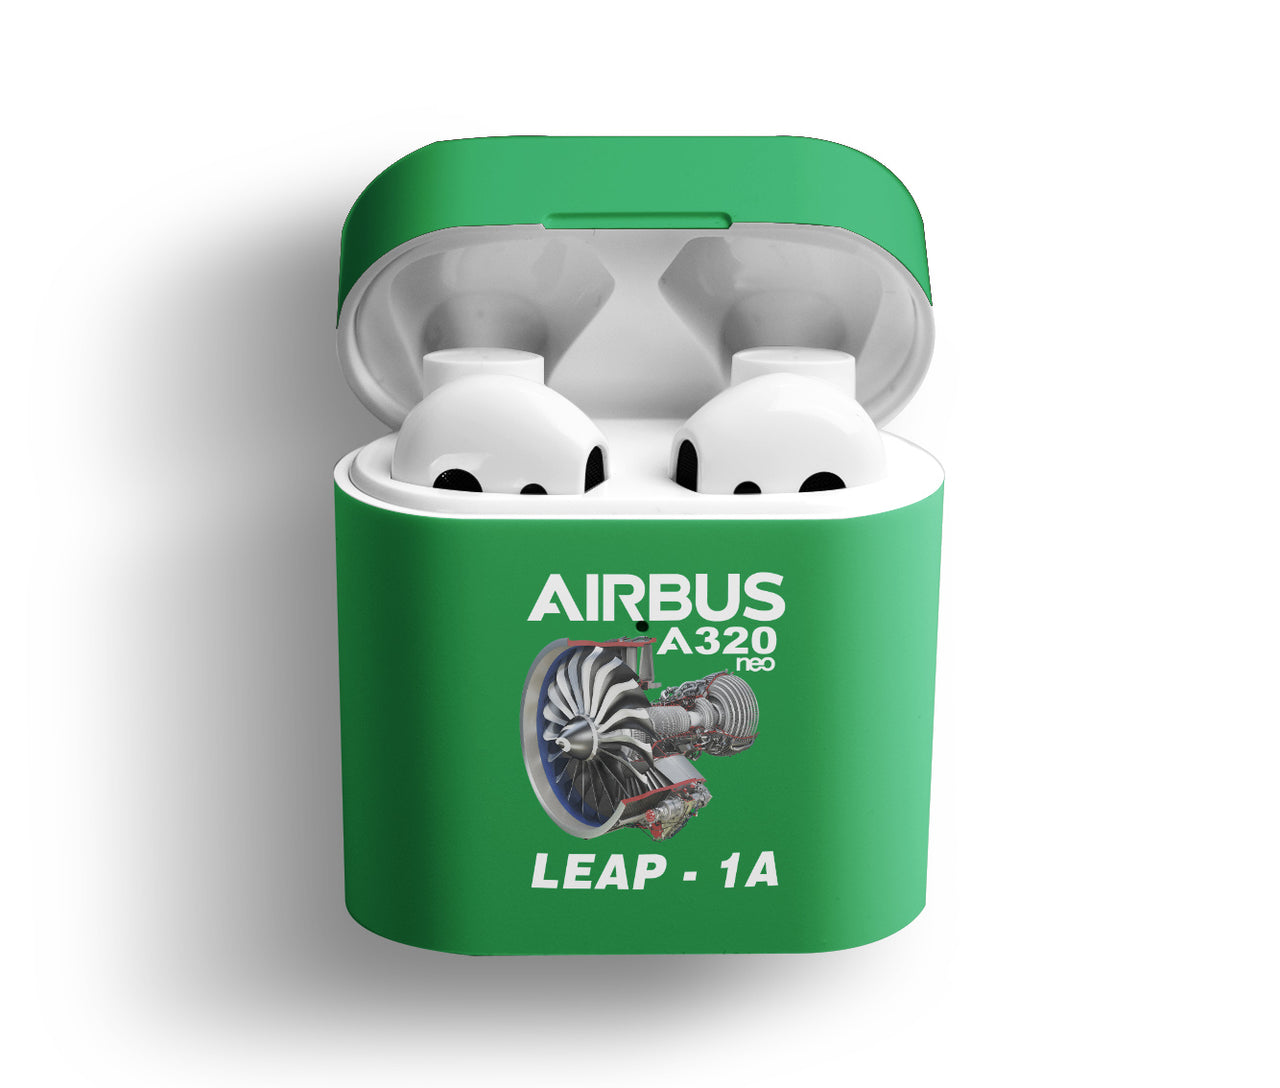 Airbus A320neo & Leap 1A Designed AirPods Cases